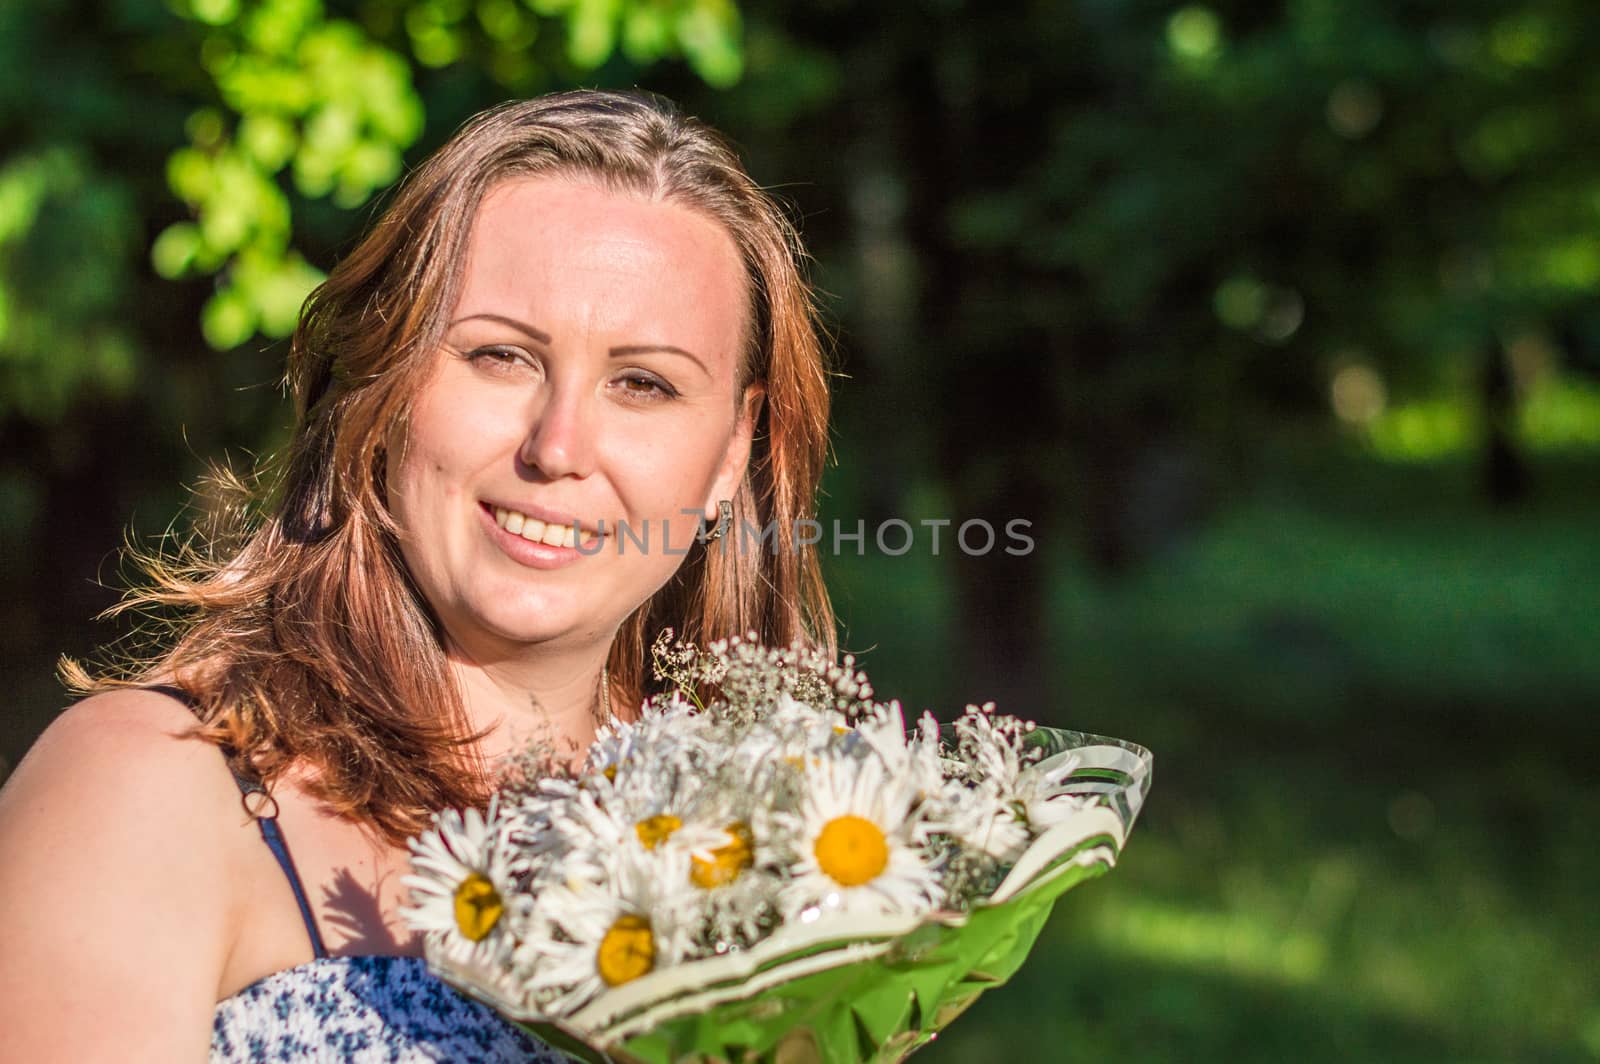 woman with bouquet of daisies by okskukuruza